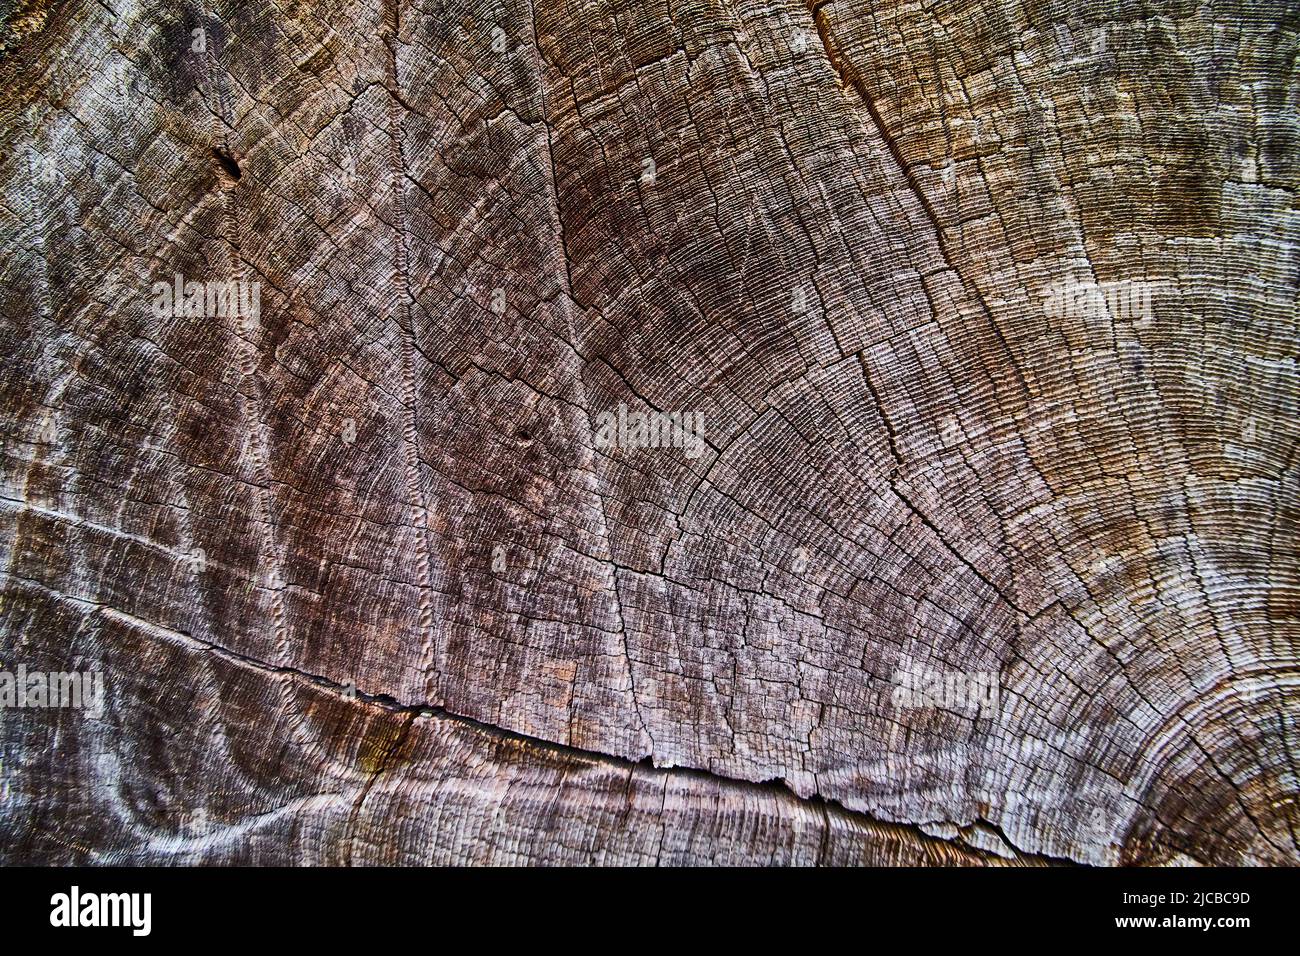 Texture detail of Redwood tree rings for centuries Stock Photo